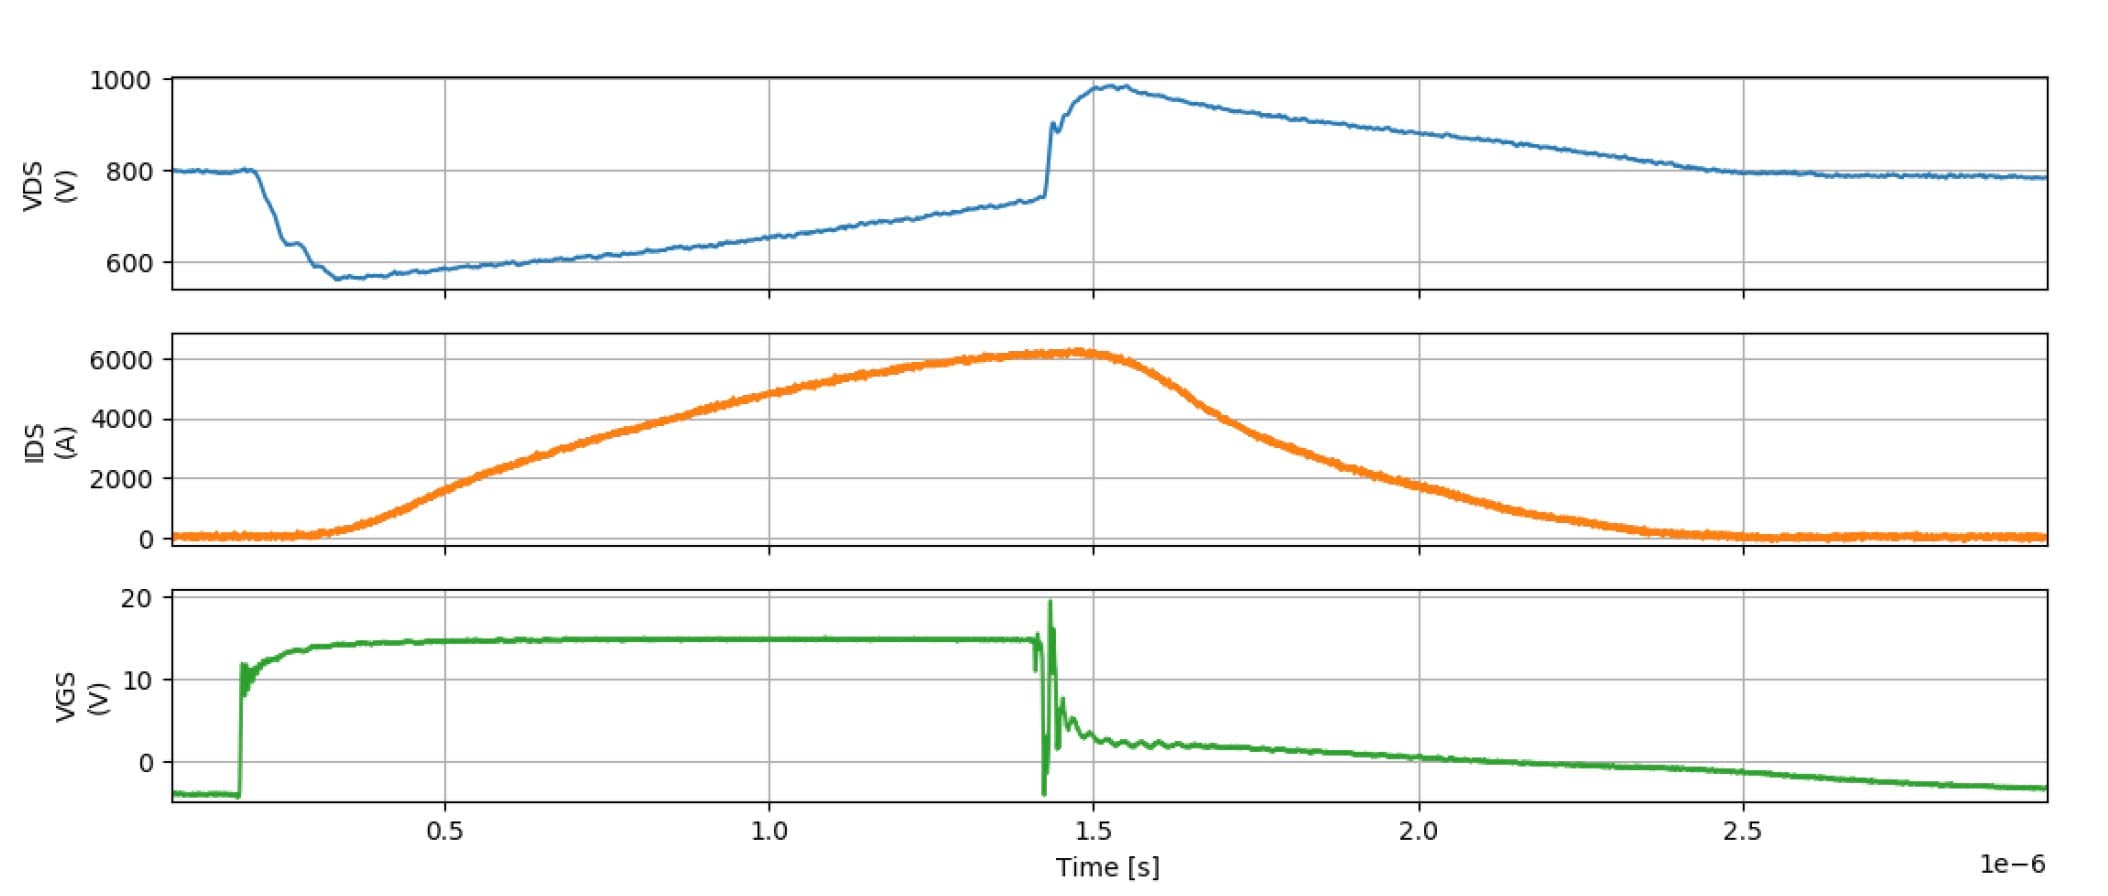 Waveform image of the inverter stack as it experiences a soft-shutdown